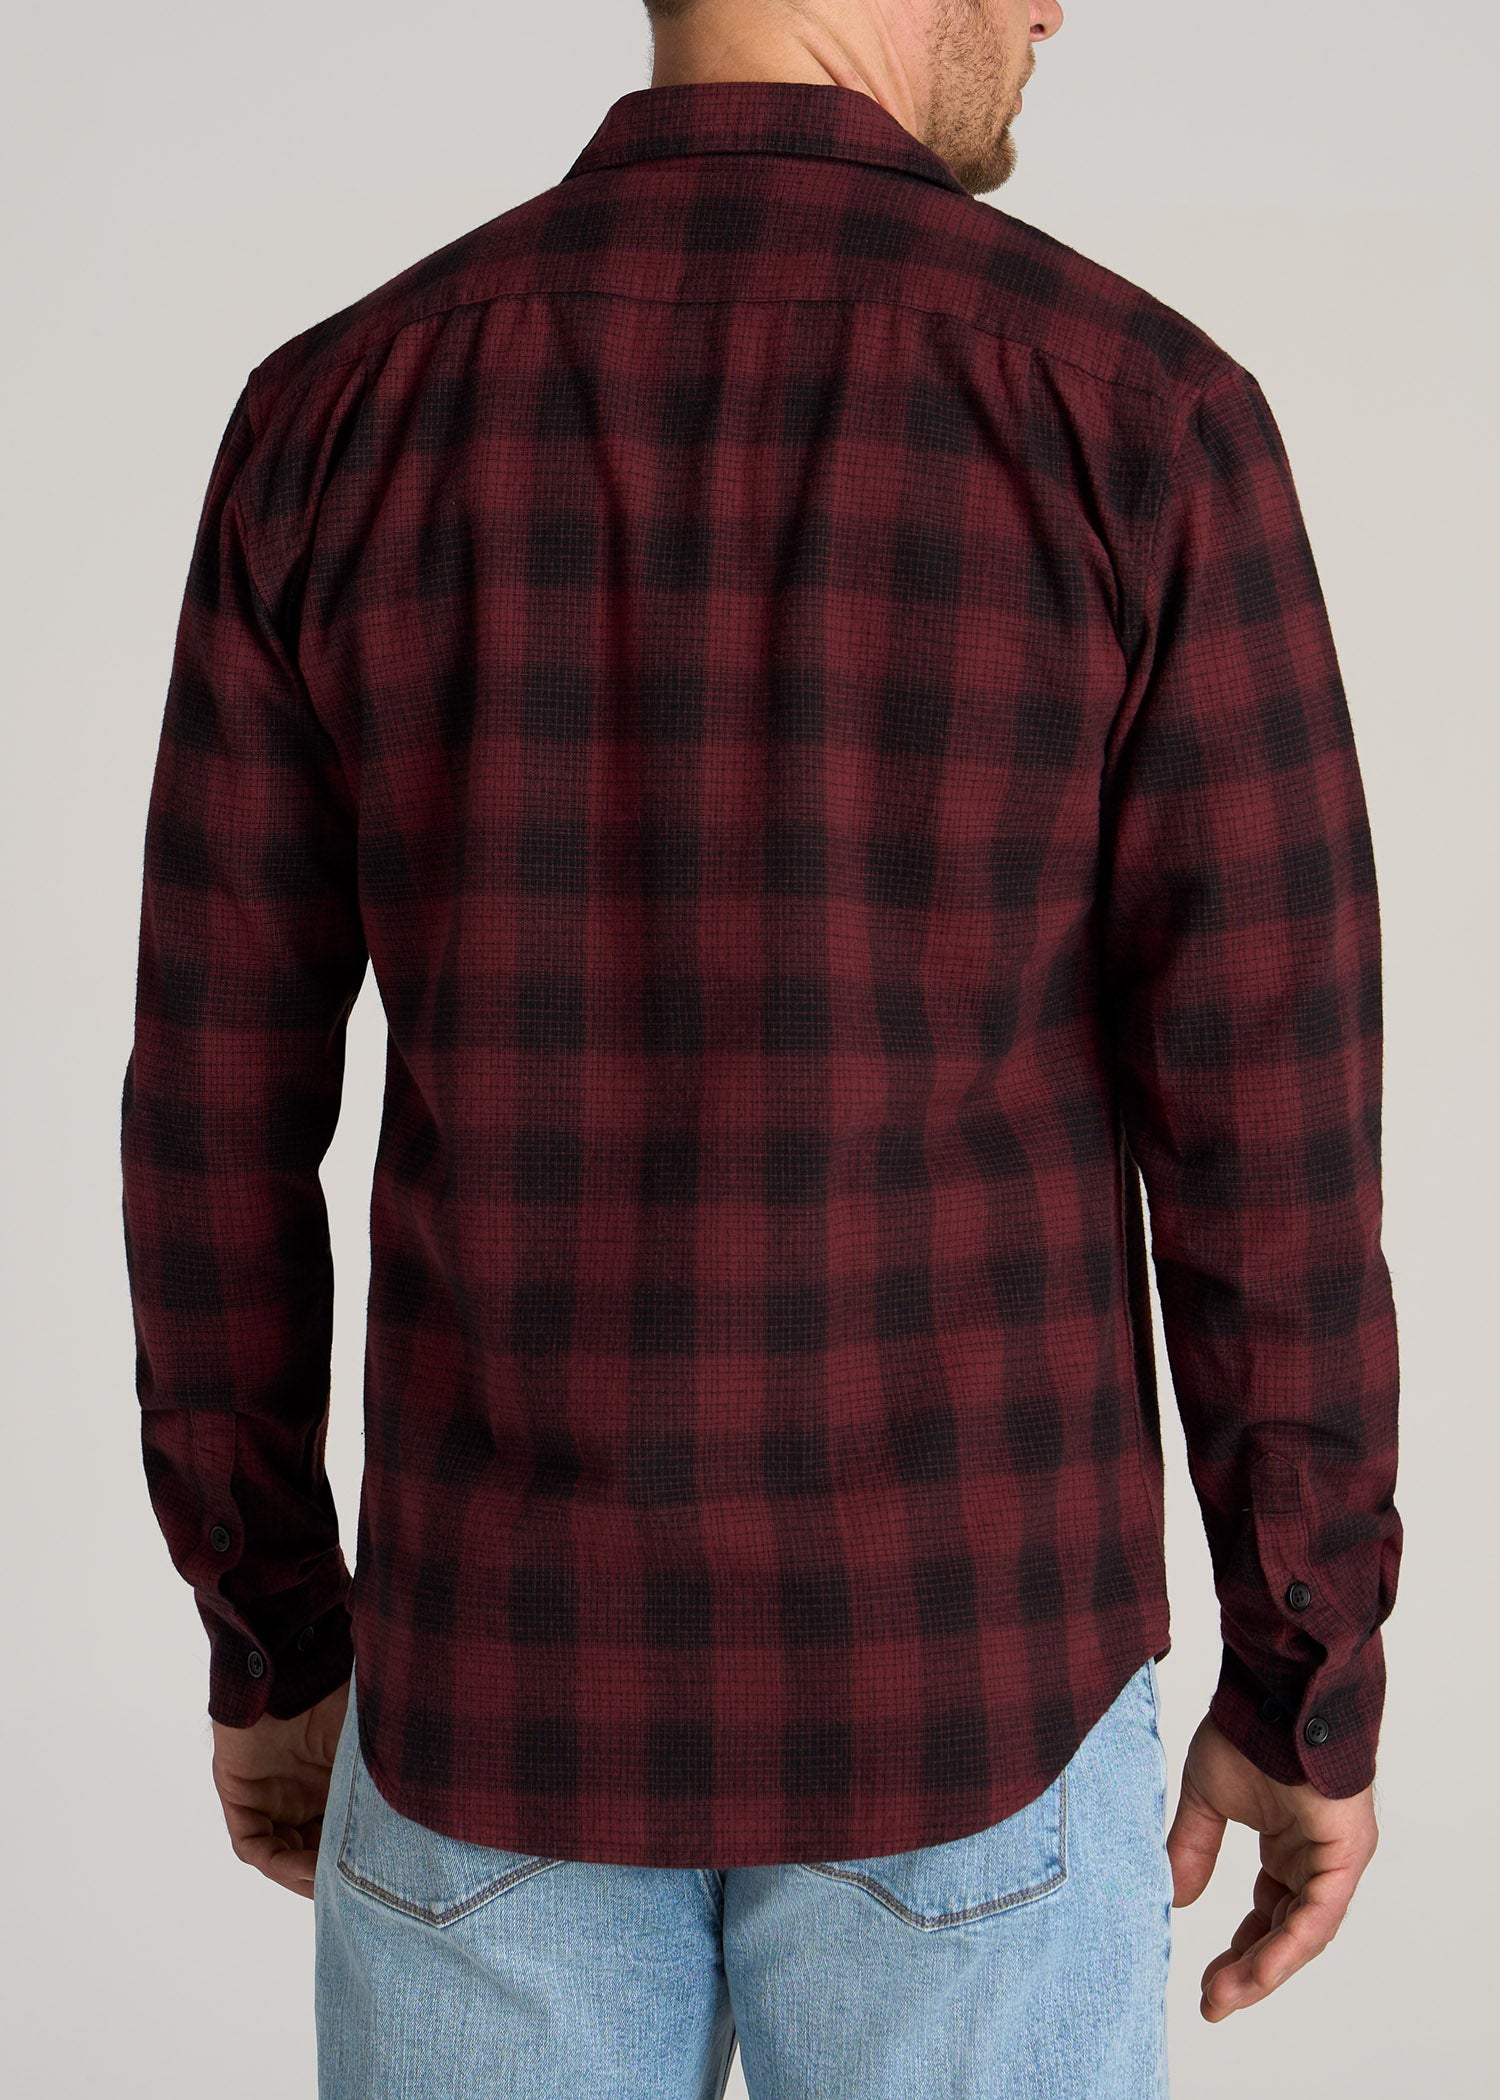 Men's Flannel Shirt | Independent Trading Company